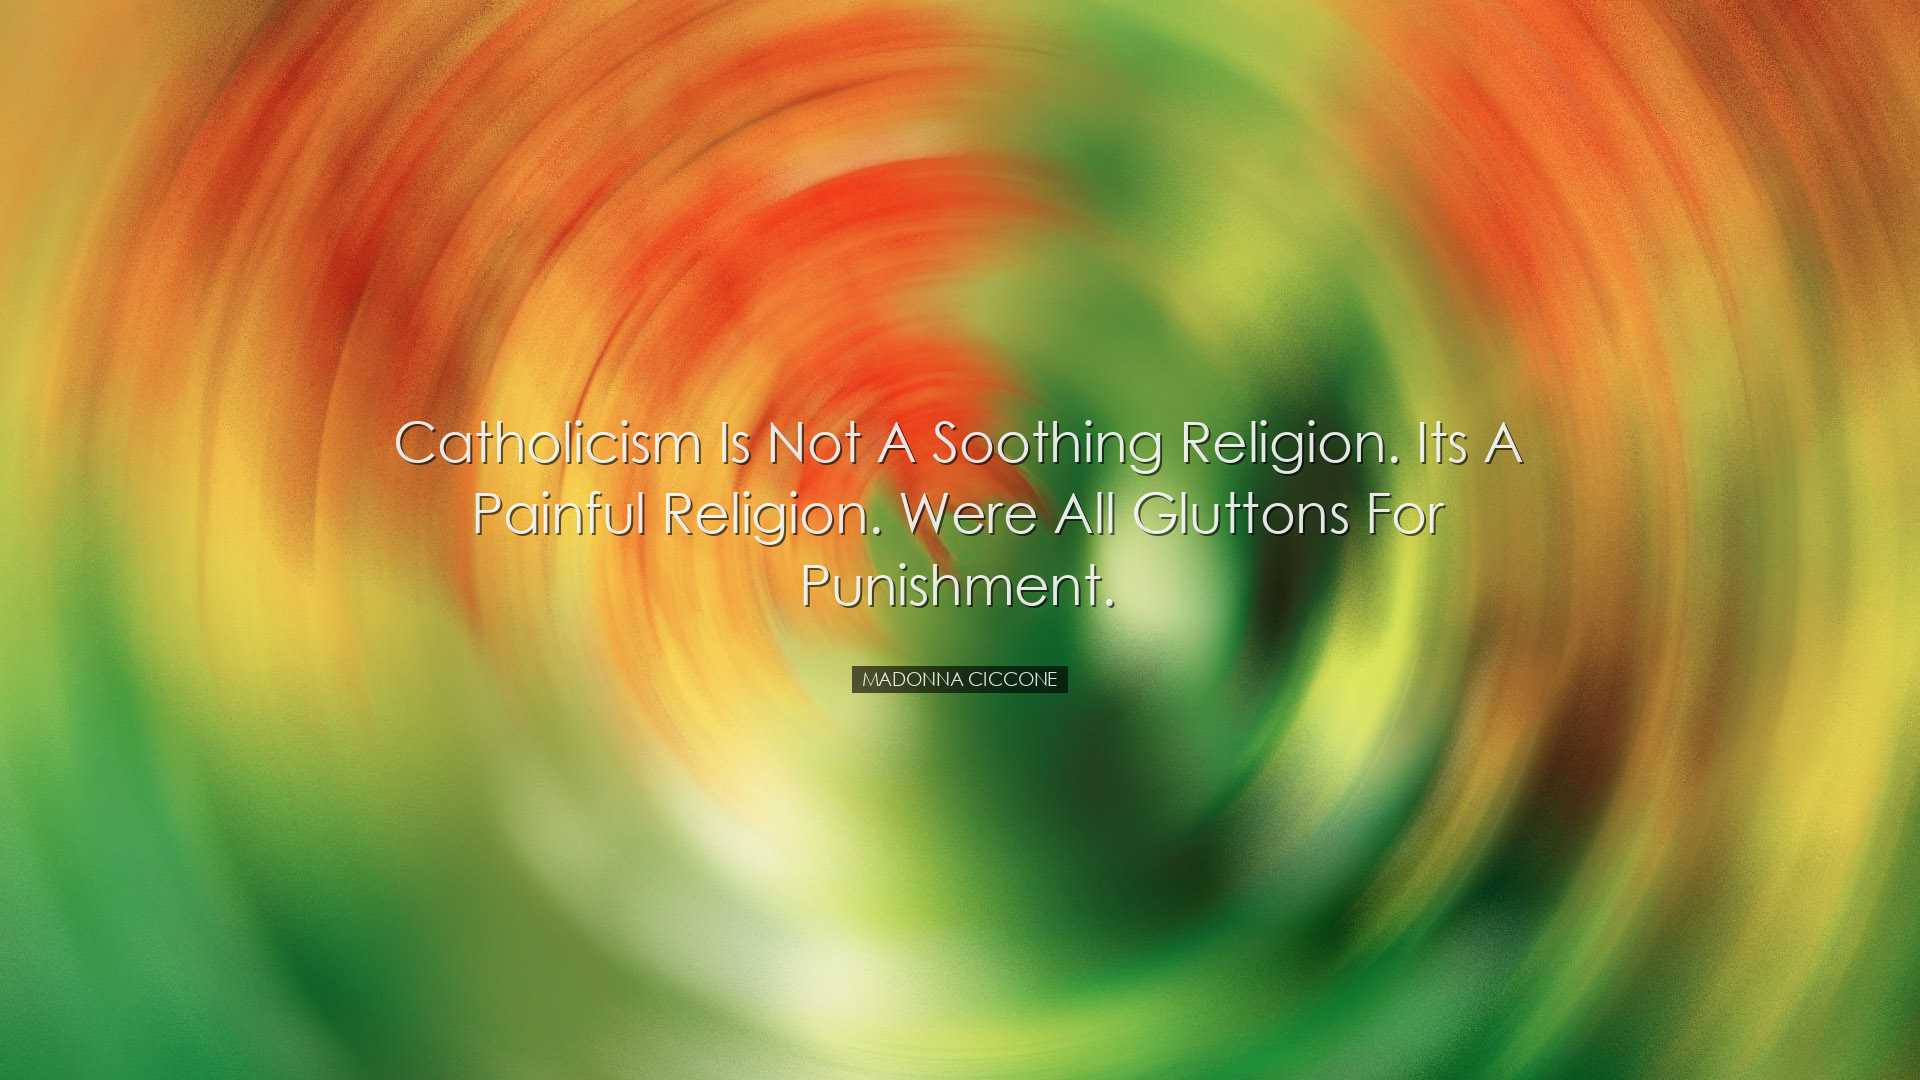 Catholicism is not a soothing religion. Its a painful religion. We